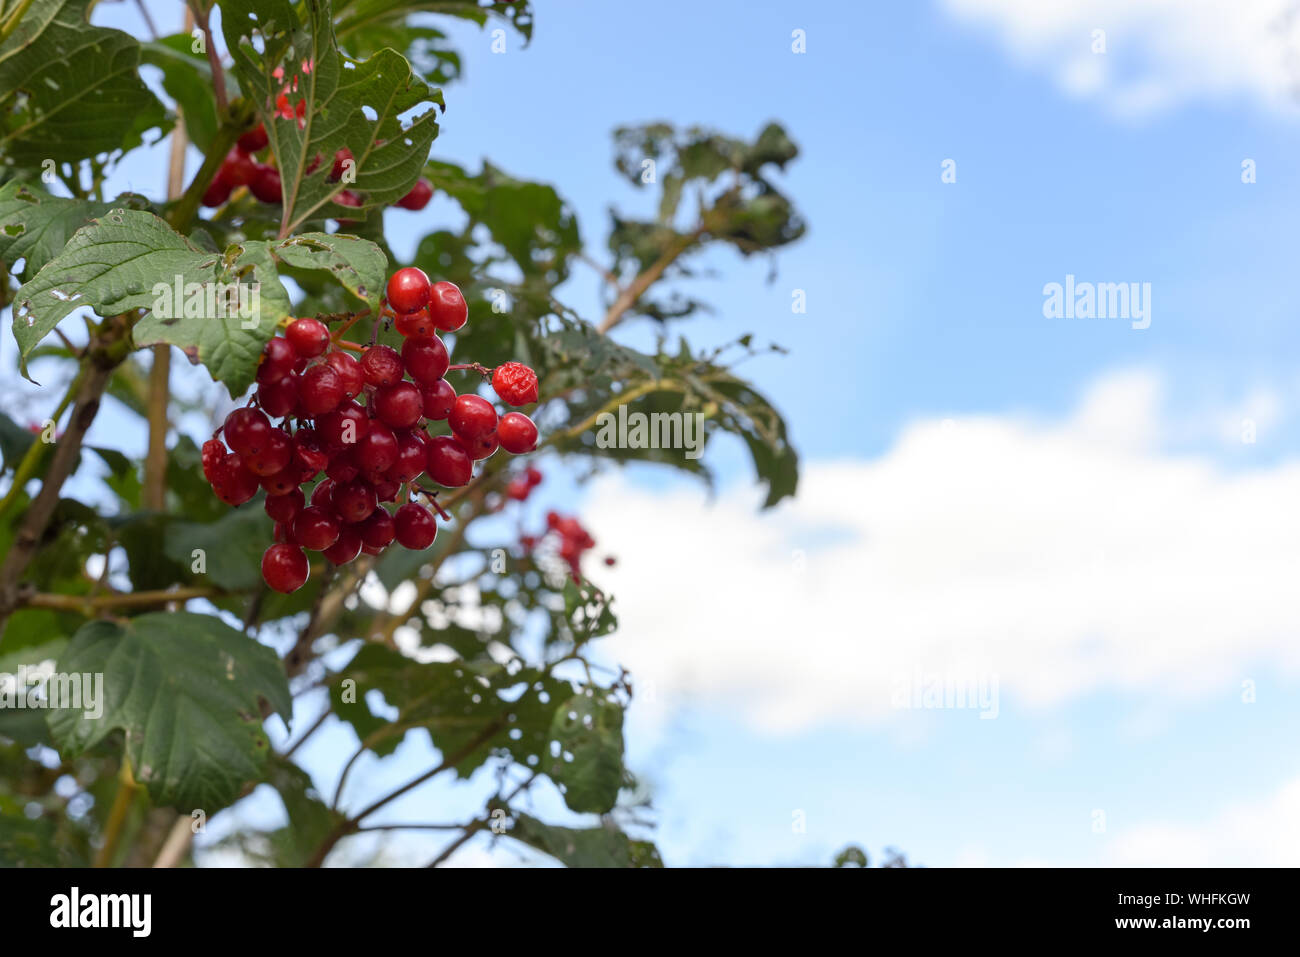 Wild red berry fruit growing outdoors in the countryside Stock Photo